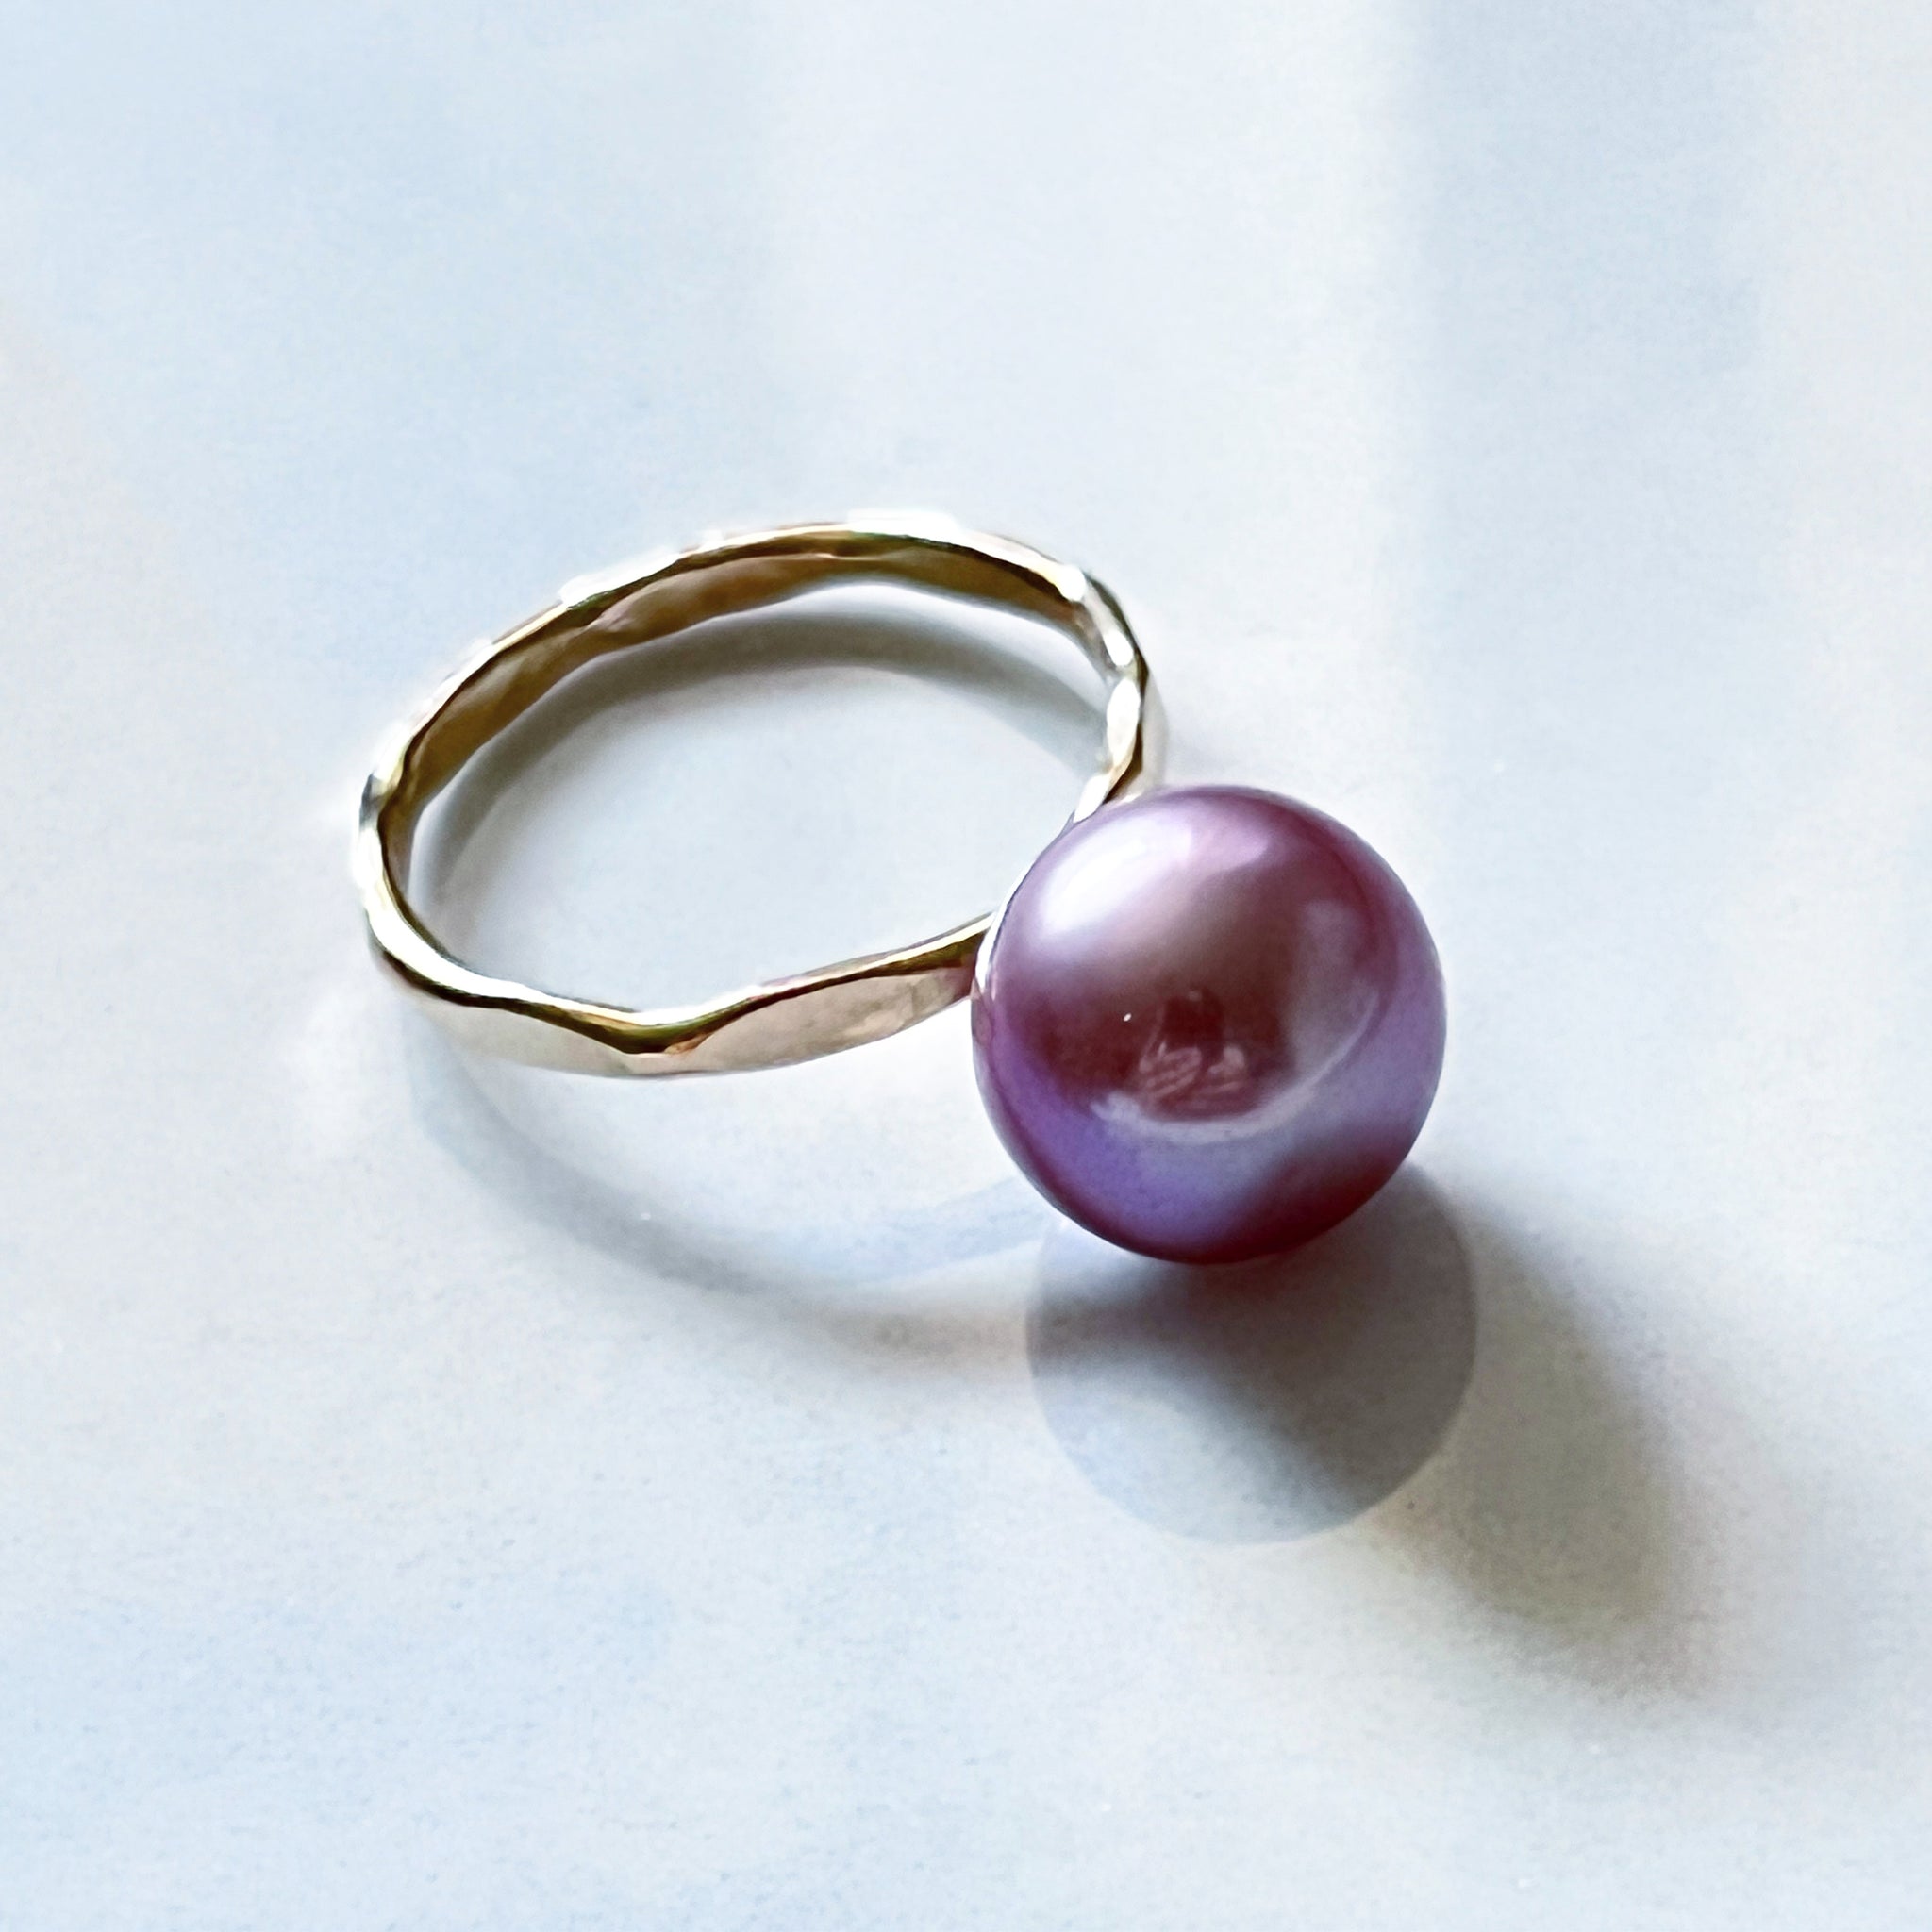 Silver Ring Crystals Big Pink Pearl Stock Photo 607776677 | Shutterstock